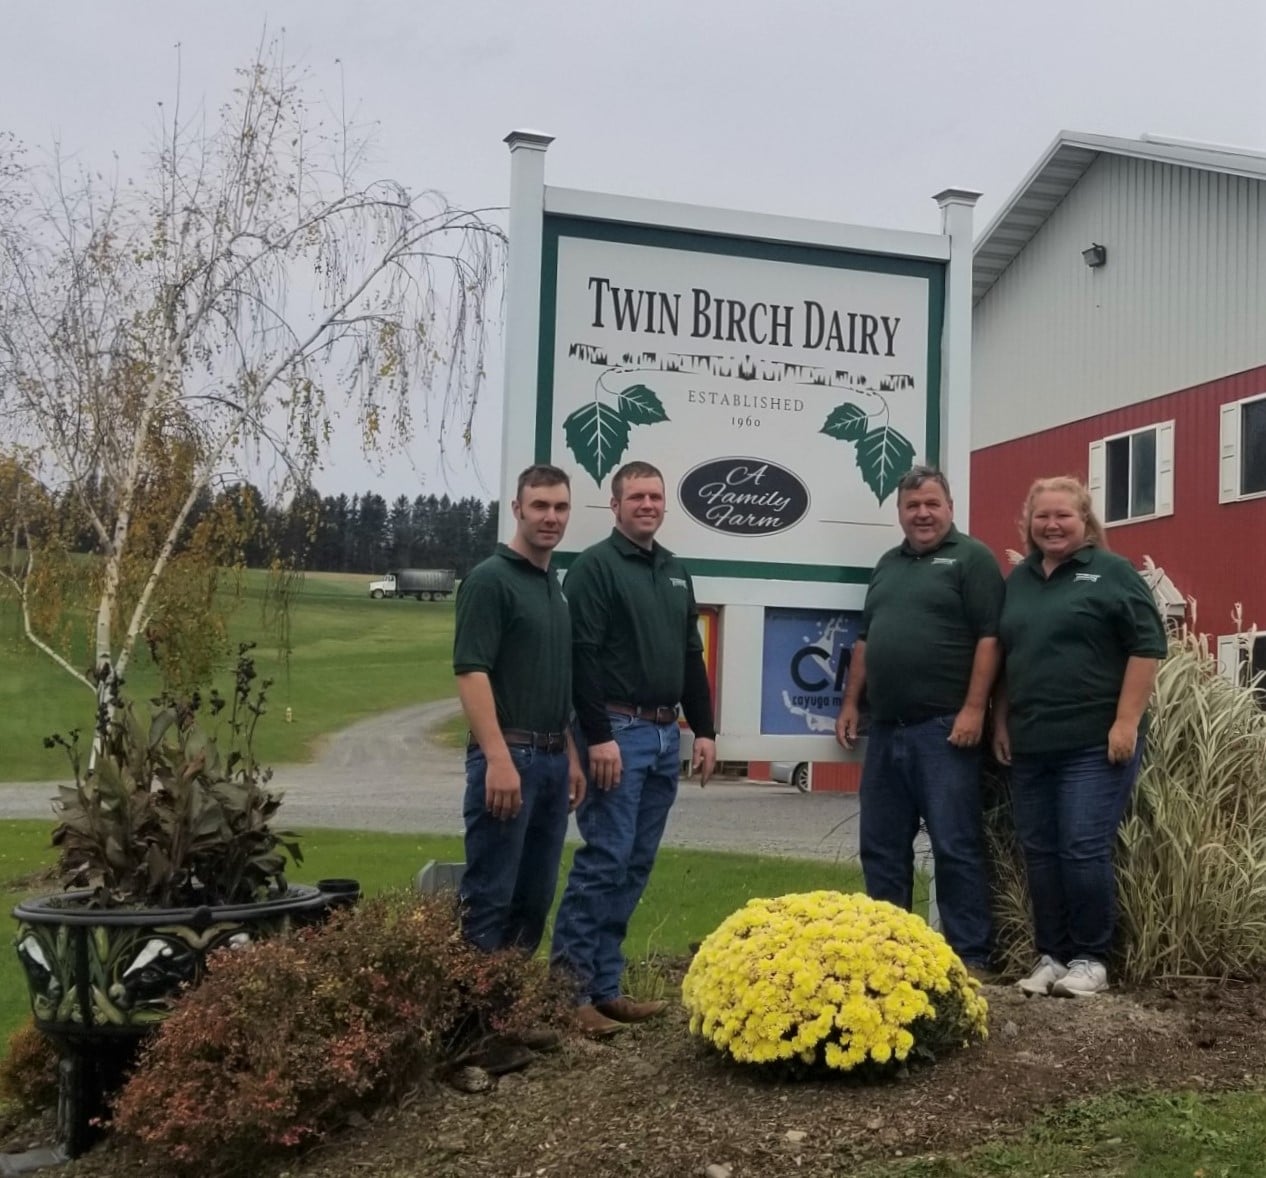 Finger Lakes Dairy Farm Receives National Award for Successful Sustainability Practices